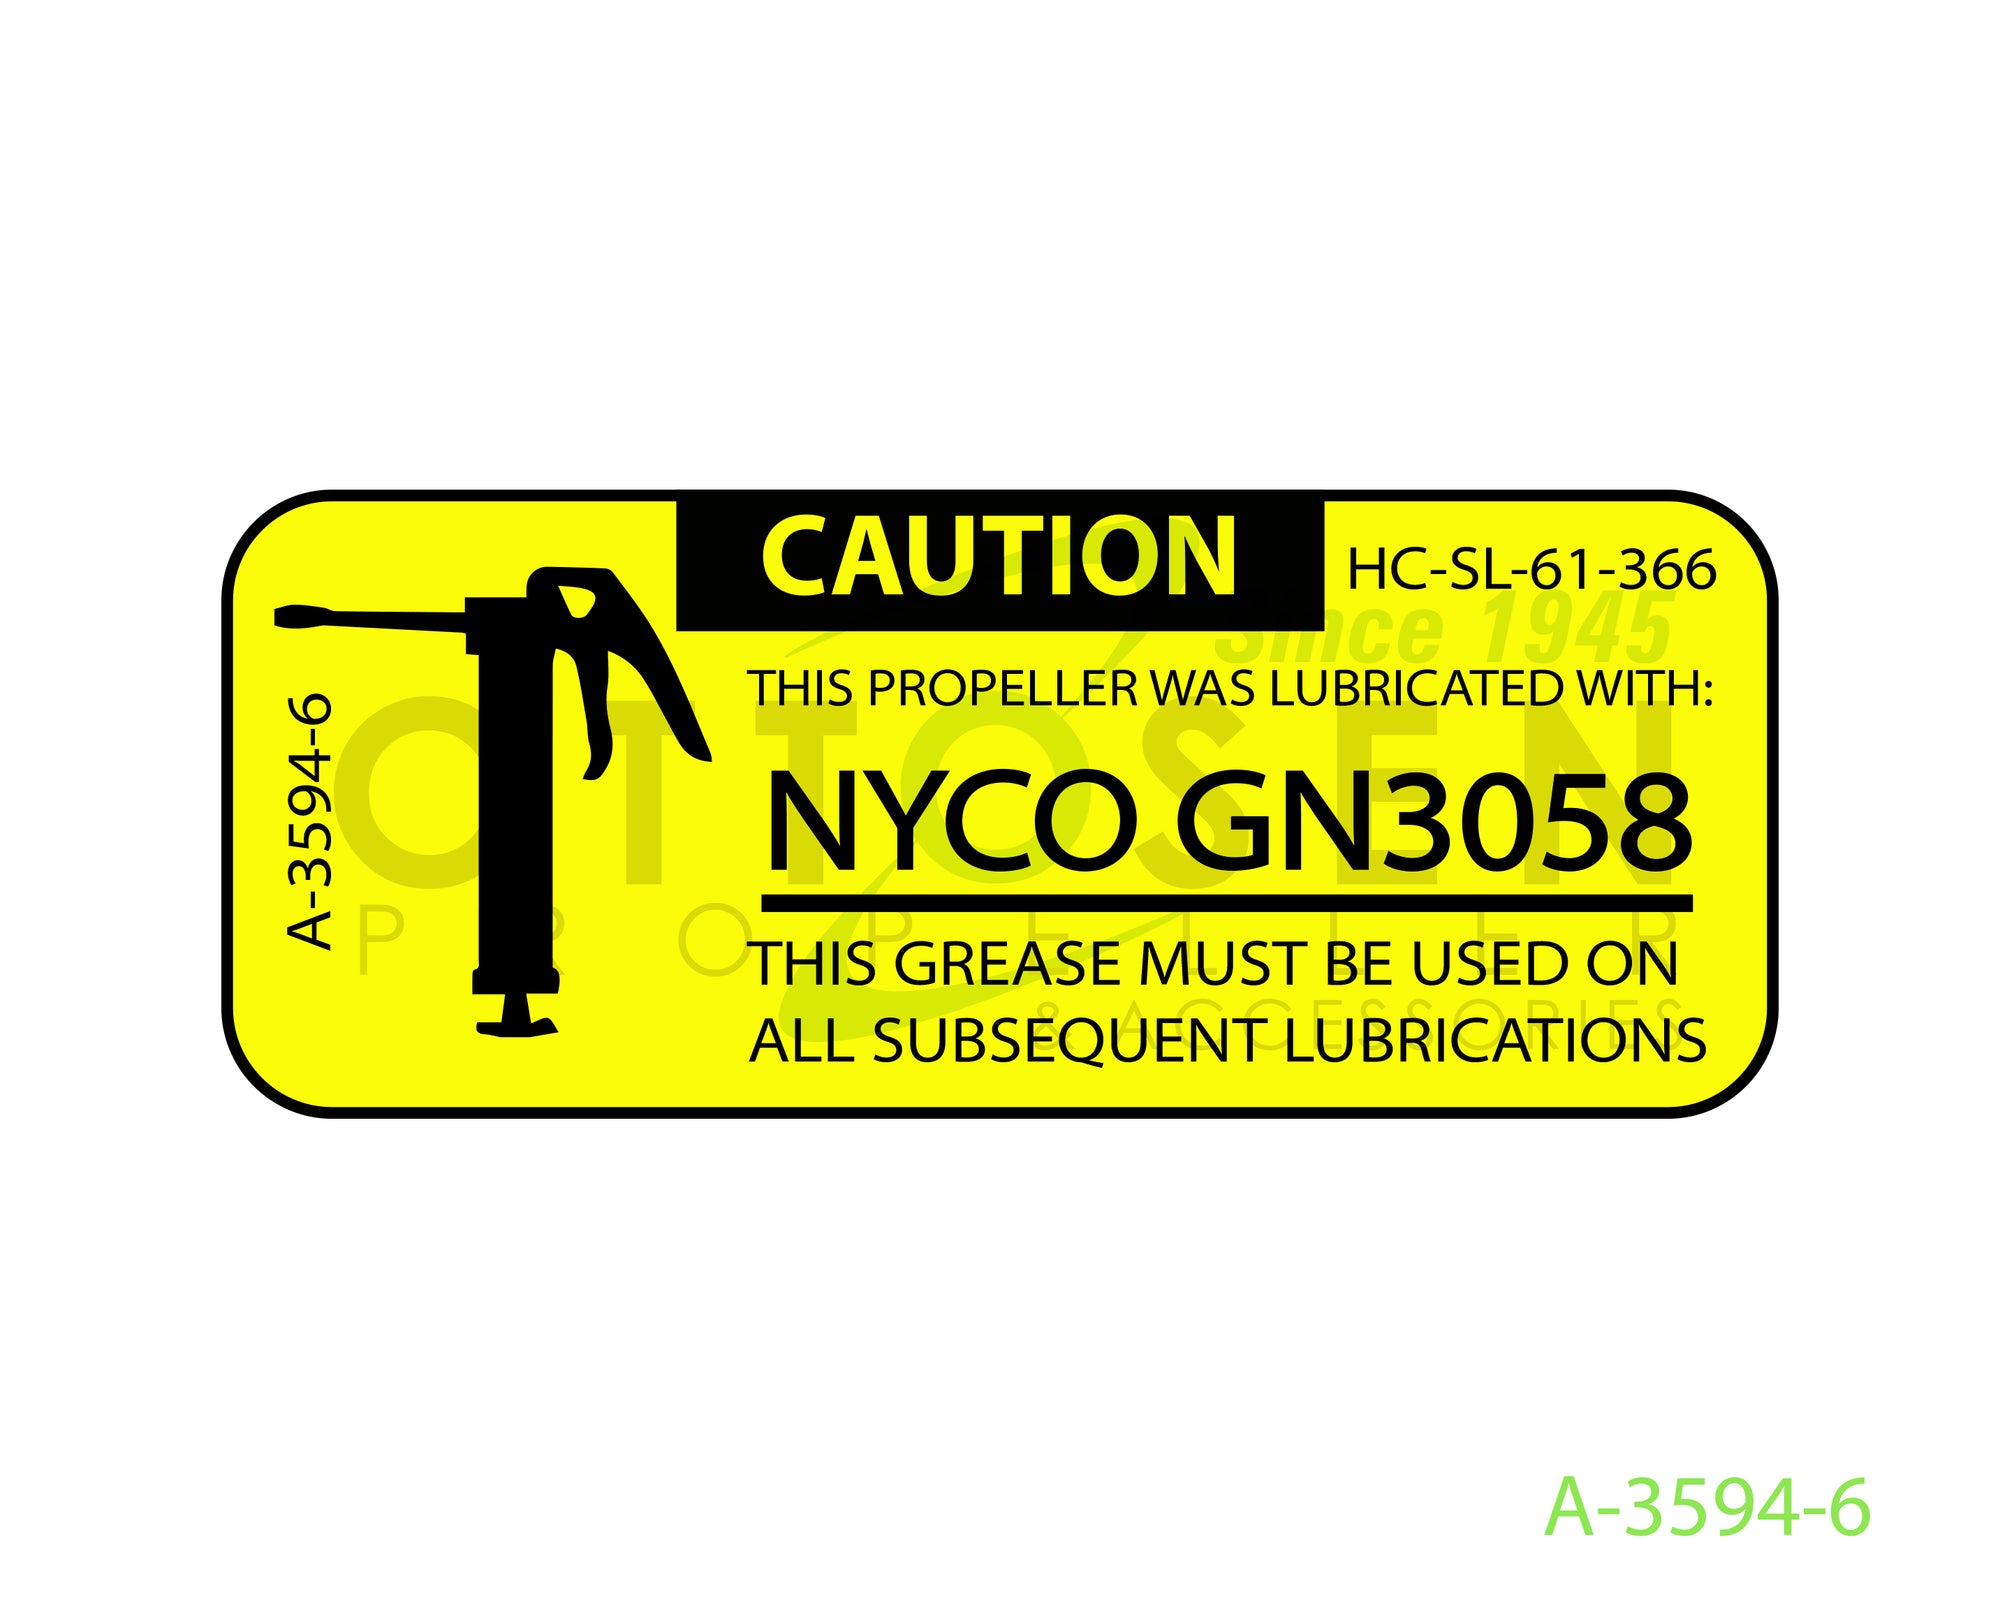 A-3594-6-HARTZELL-PROPELLER-LUBRICATION-NYCO-DECAL-PICTURE-1